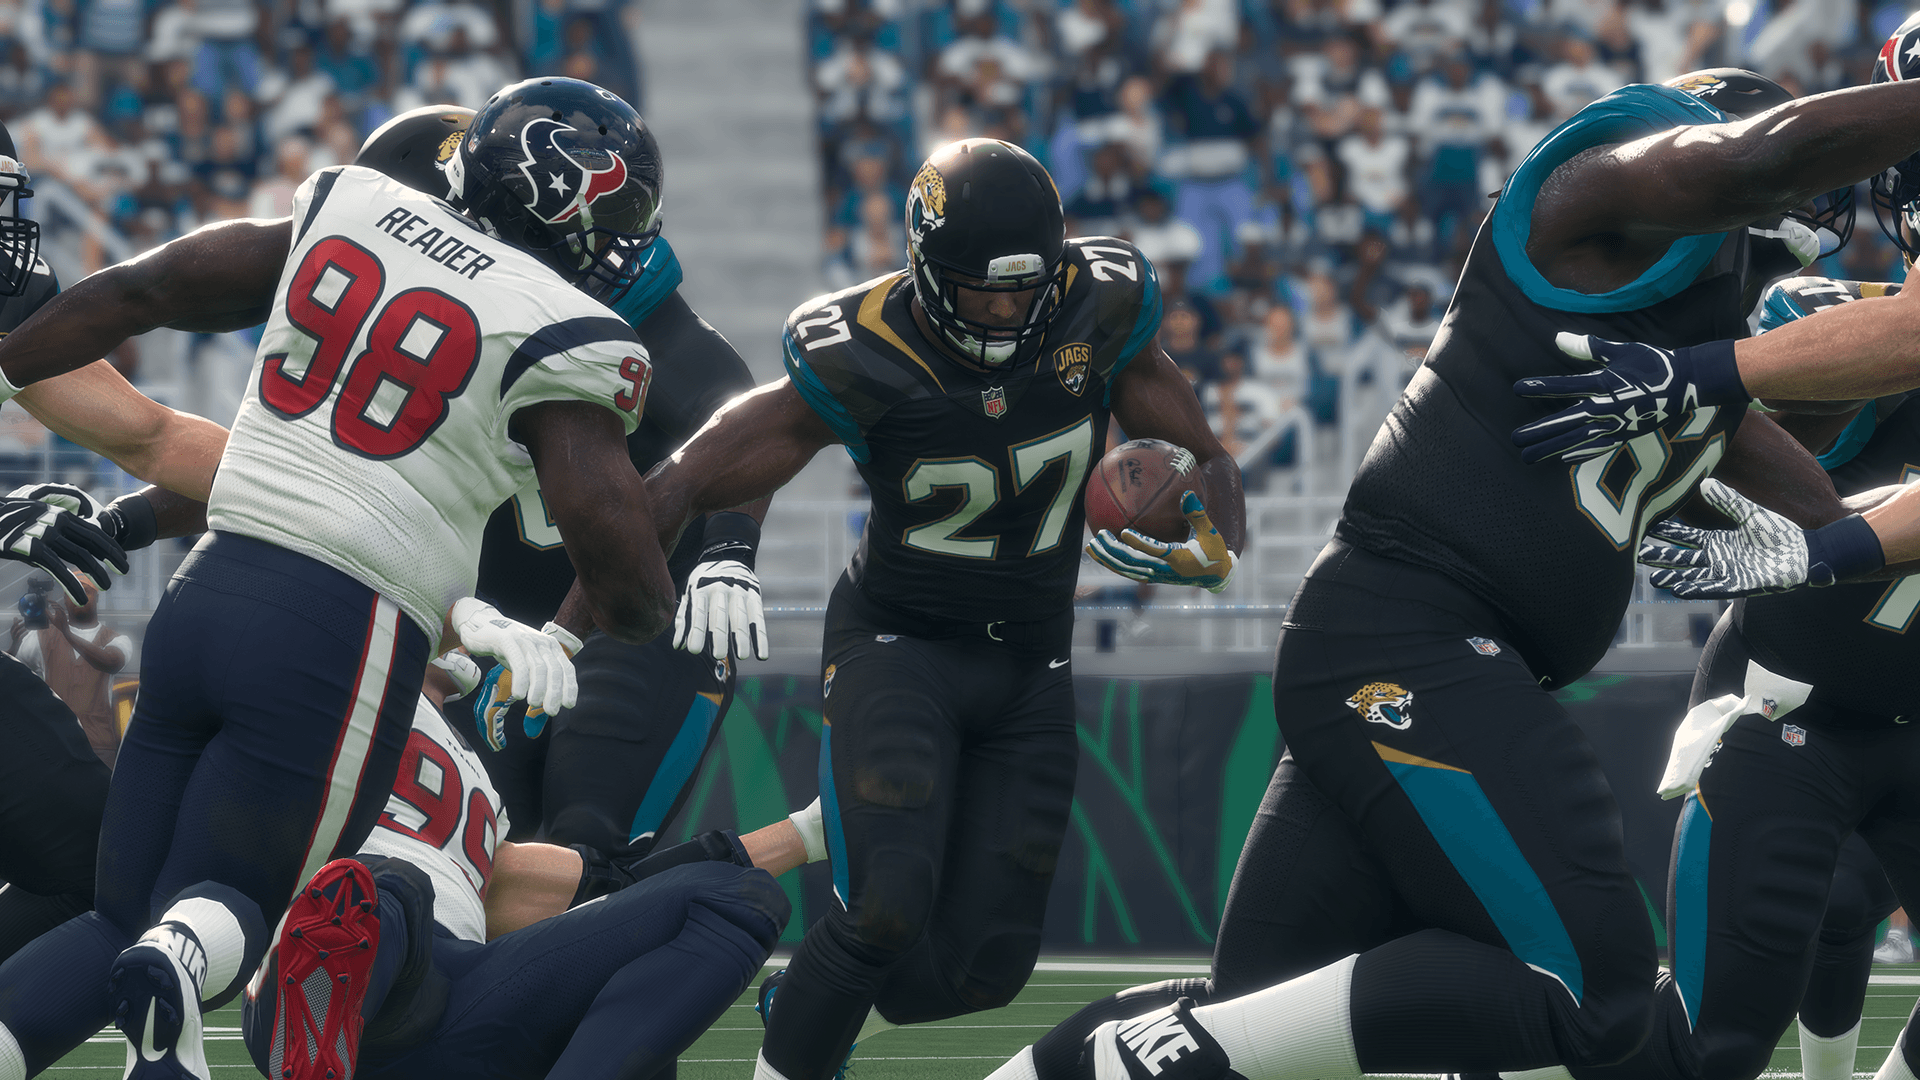 NFL 18 Review - At the Top of Their Game